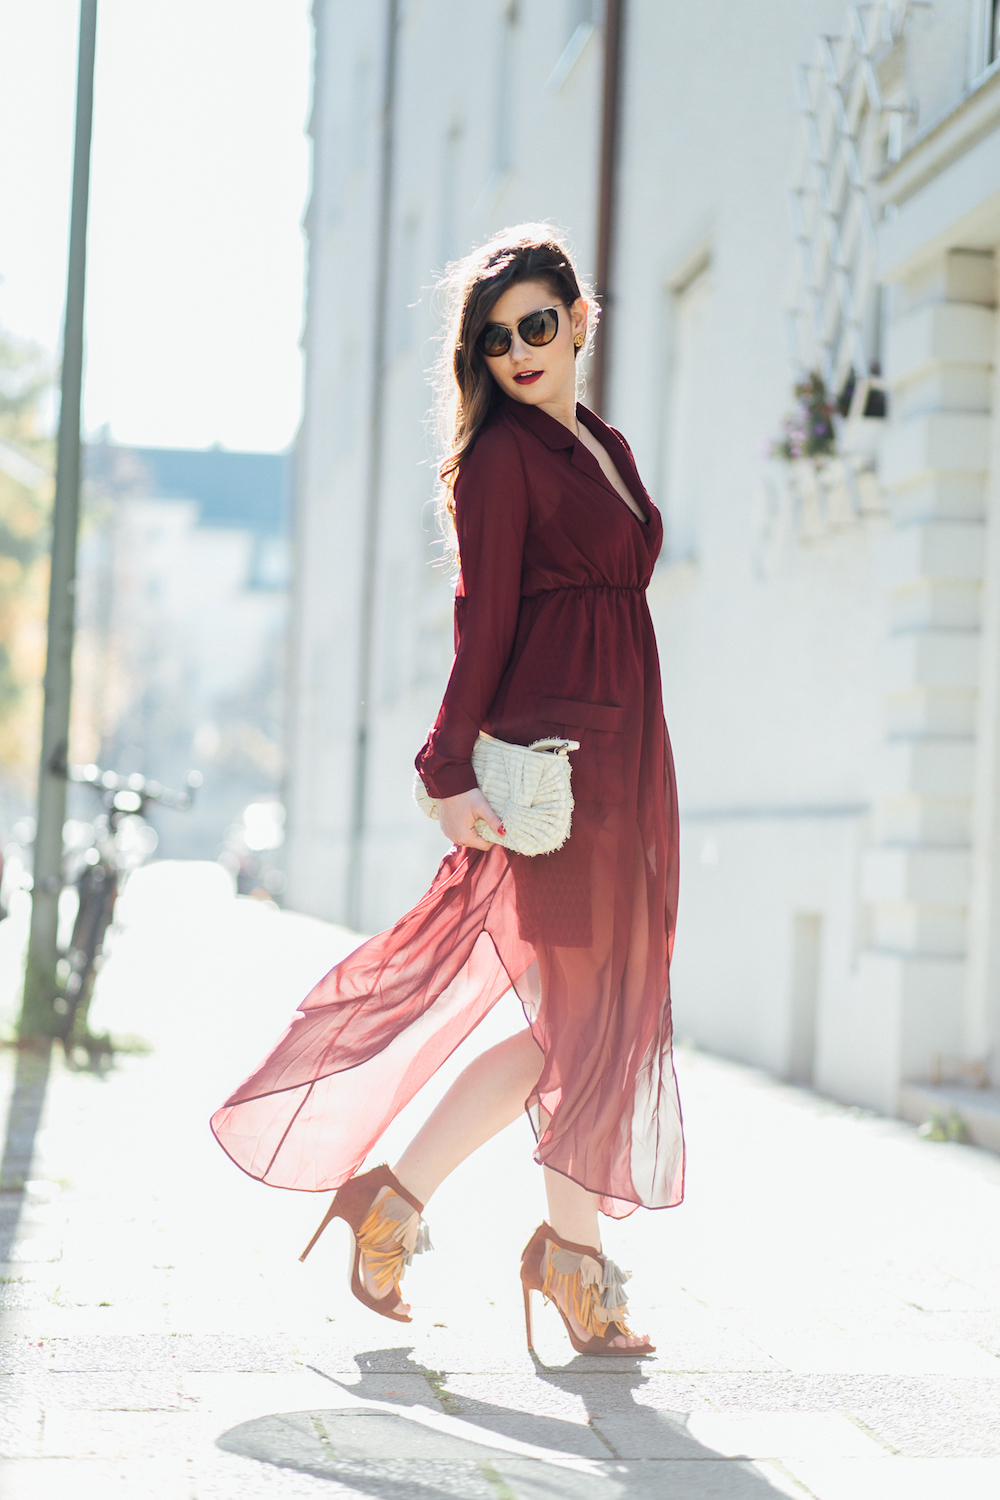 sara-bow-herbst-outfit-rotes-kleid-zara-pumps